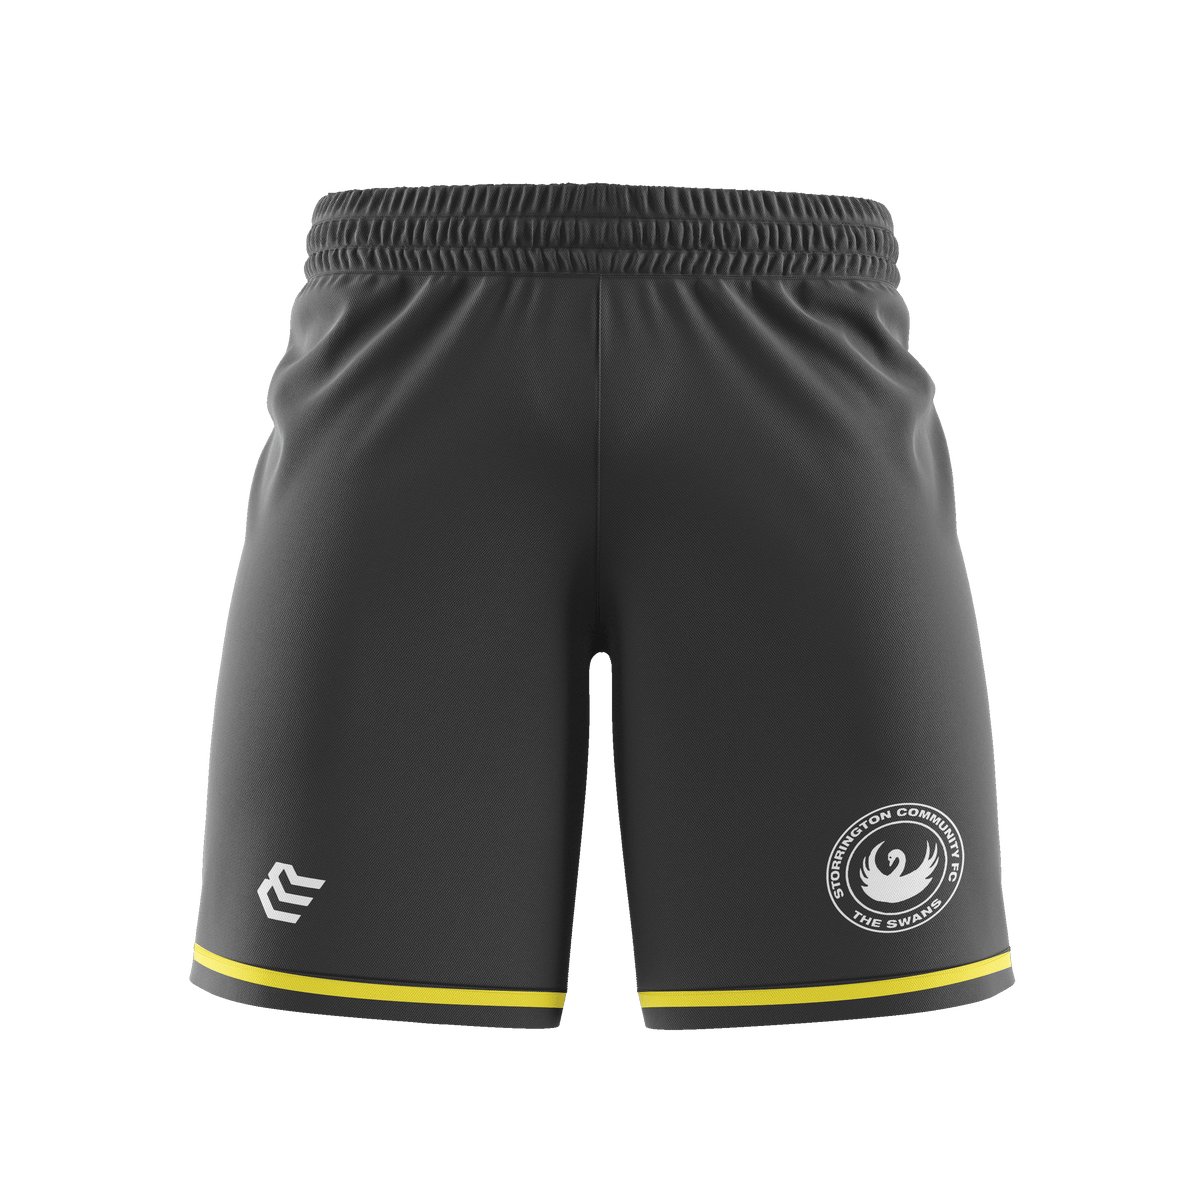 away_shorts_front_view.png__PID:8024b539-6f2d-45c5-a464-0880faba7d77